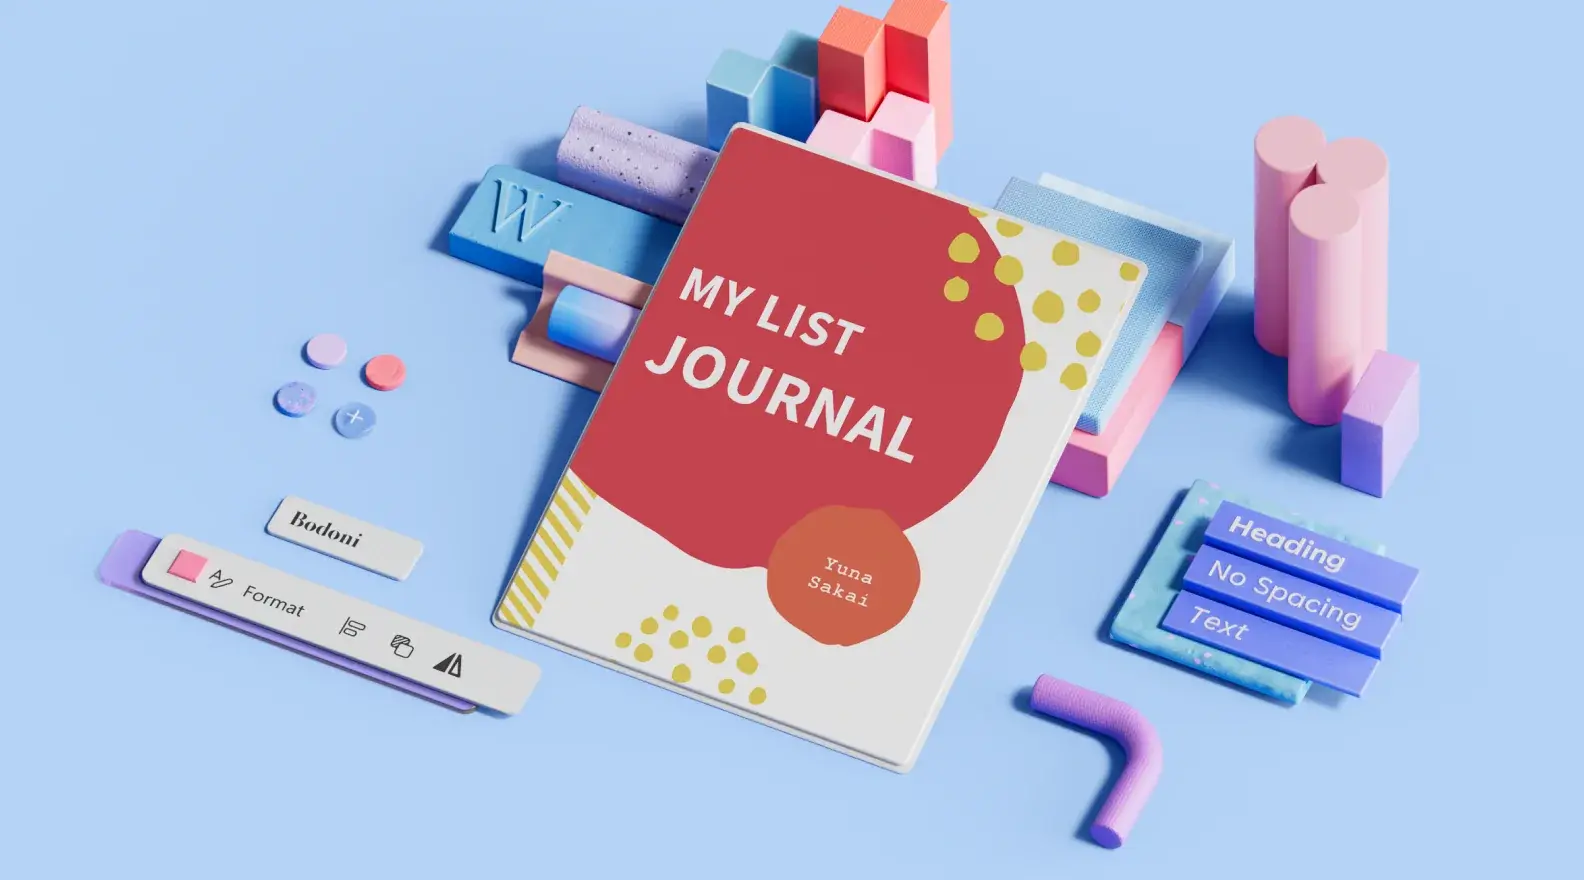 List-style journal template surrounded by 3D design elements